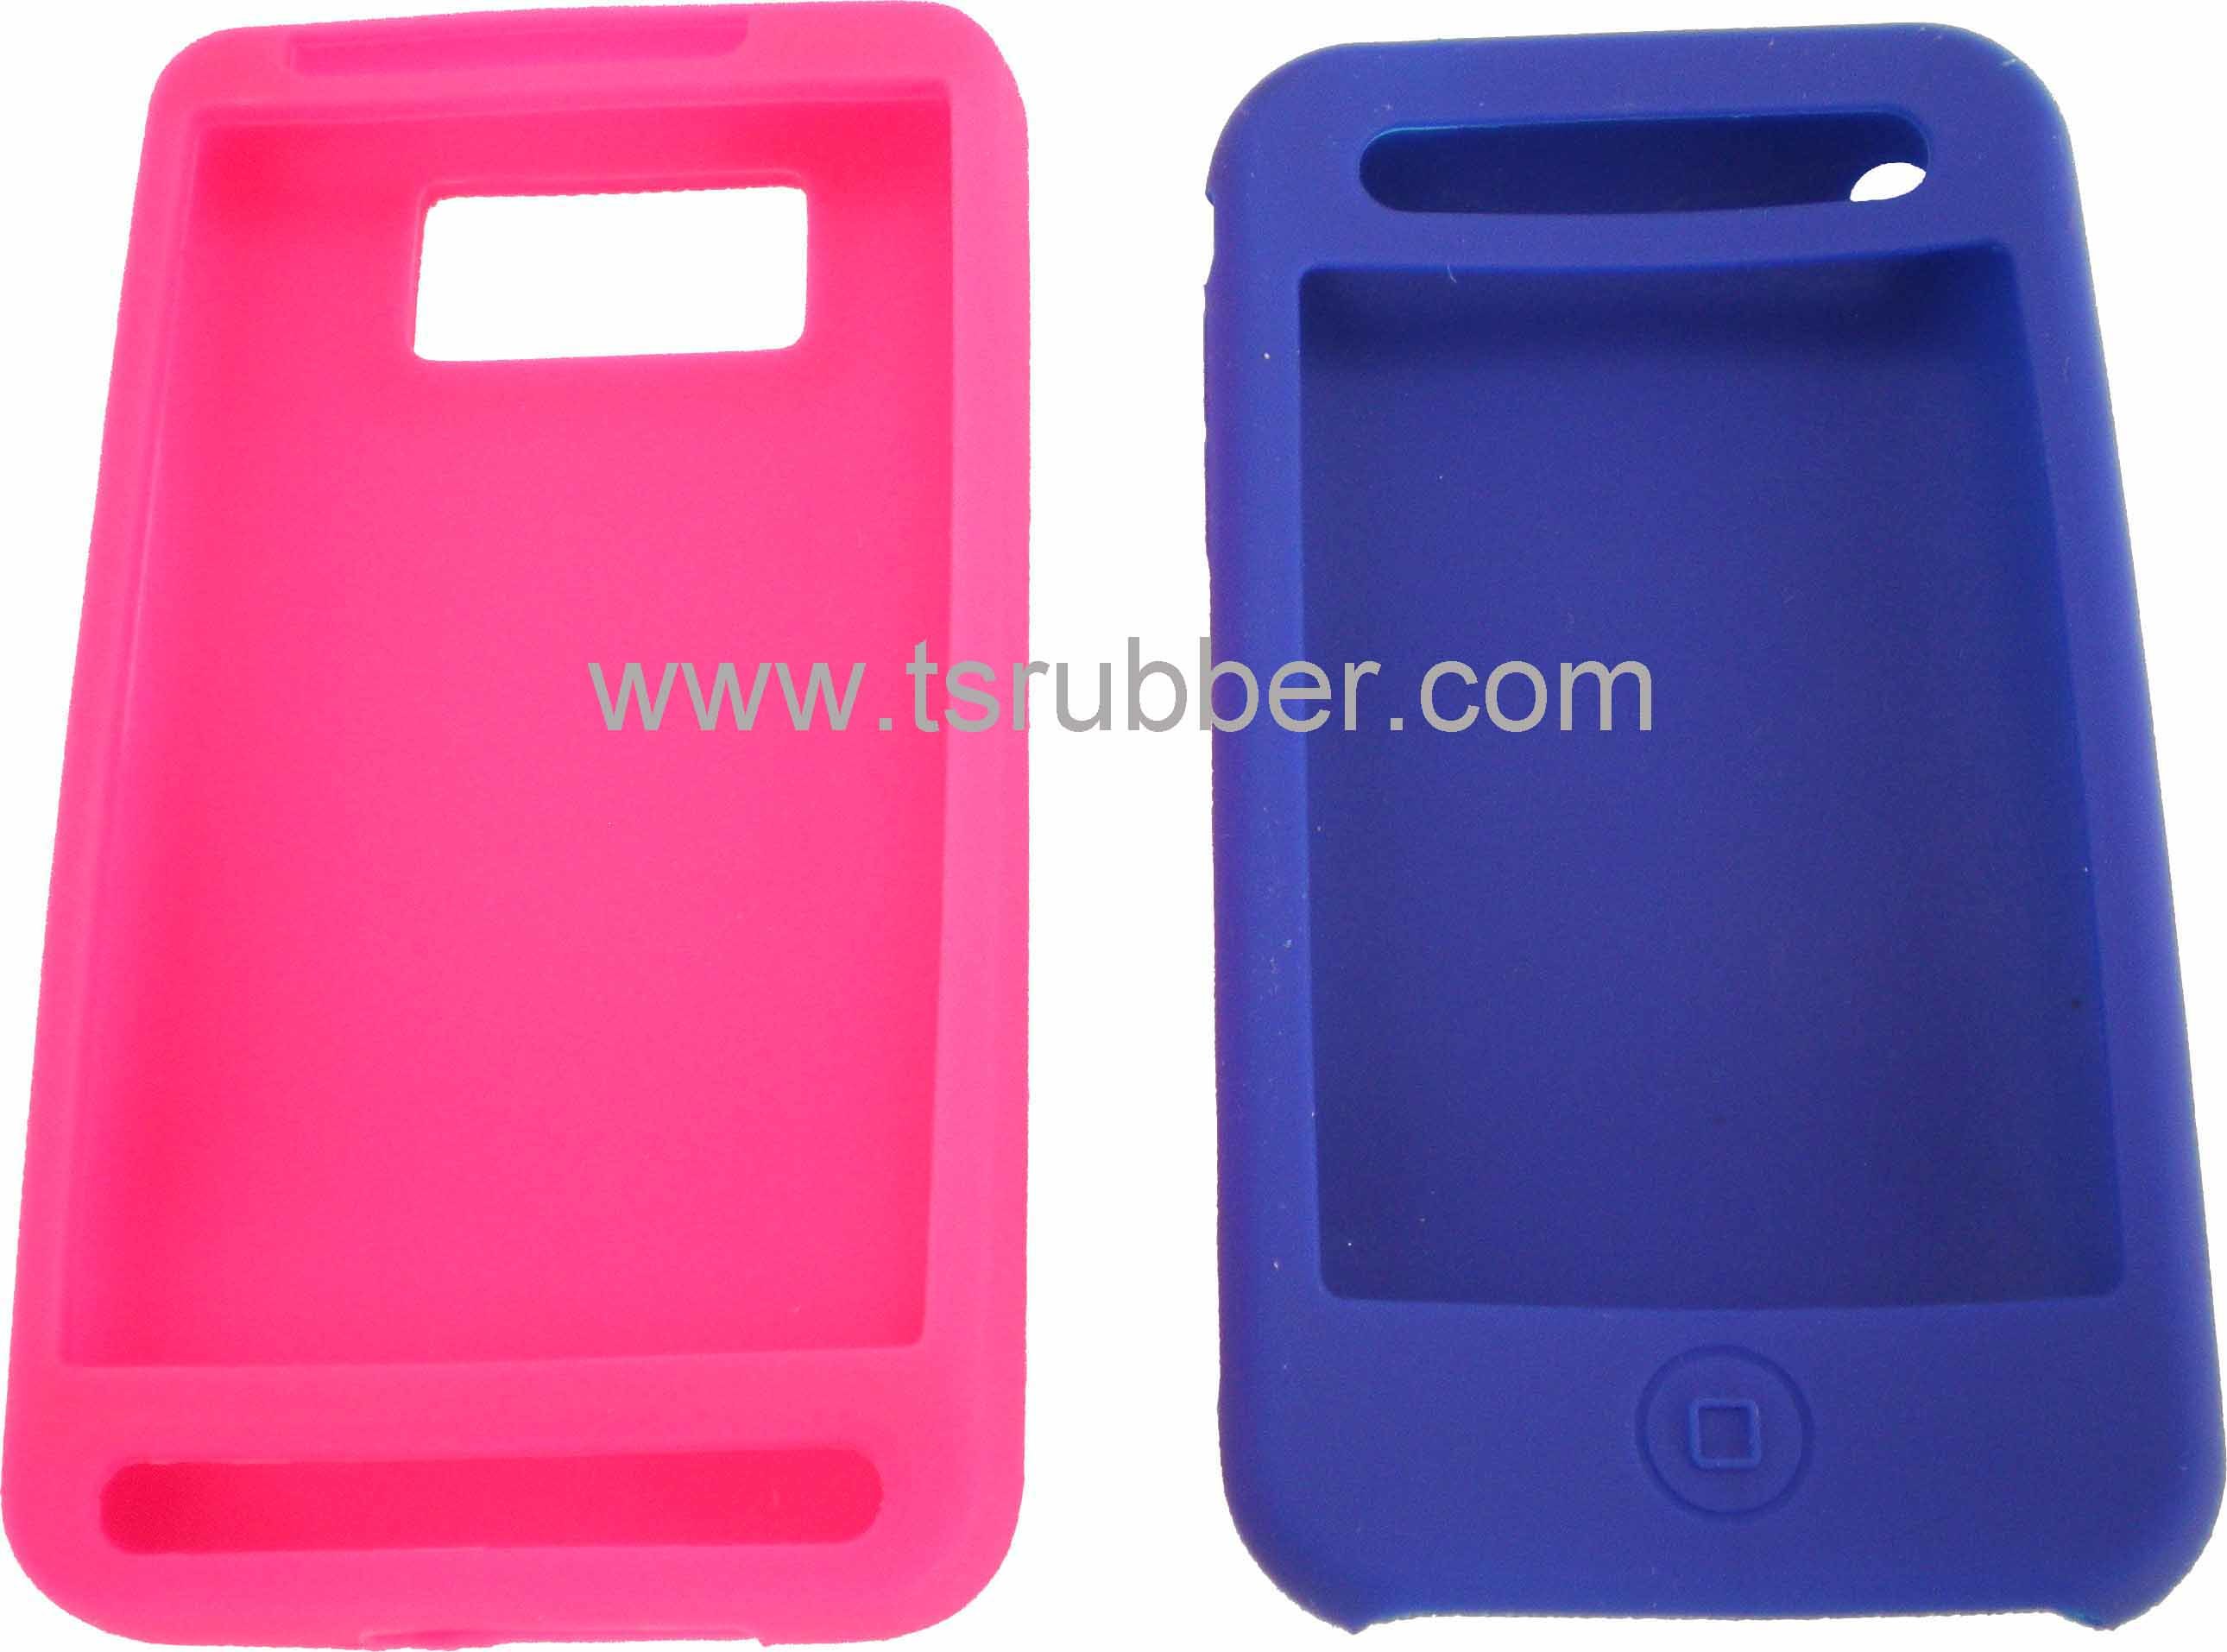 Mobile Phone Silicone Cases/Covers